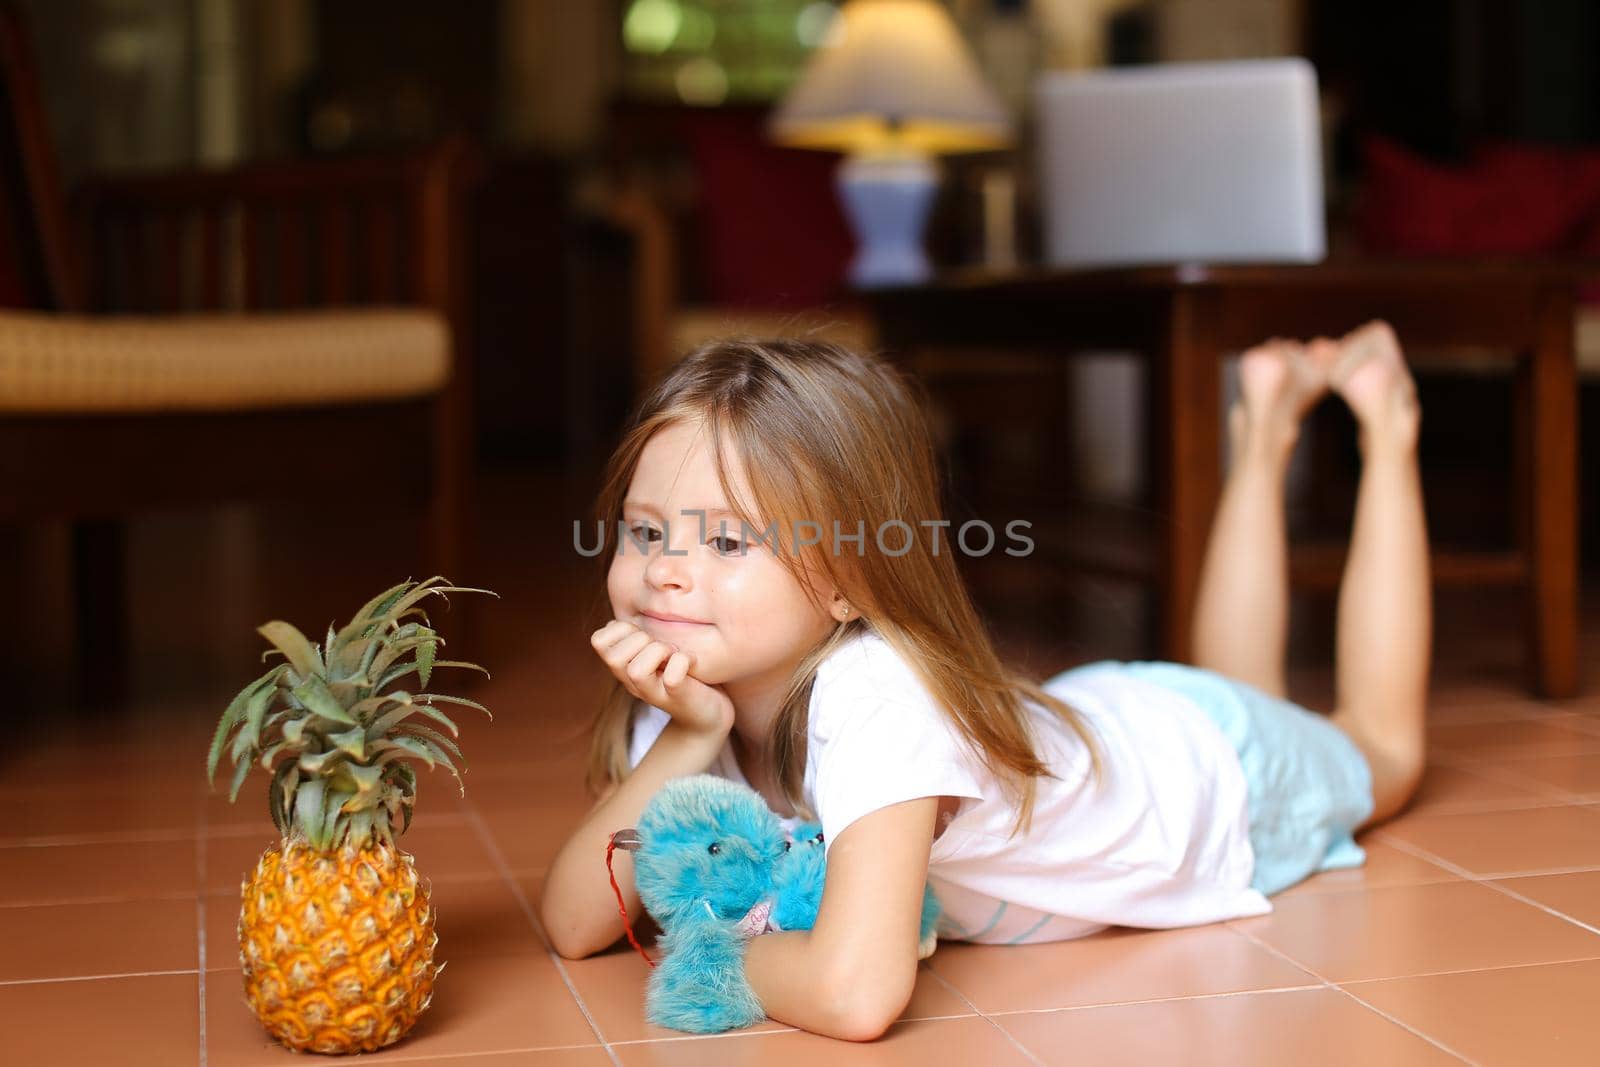 Little barefoot girl lying on floor and playing with pineapple and toy, laptop in background. Concept of health vegeterian life and childhood.